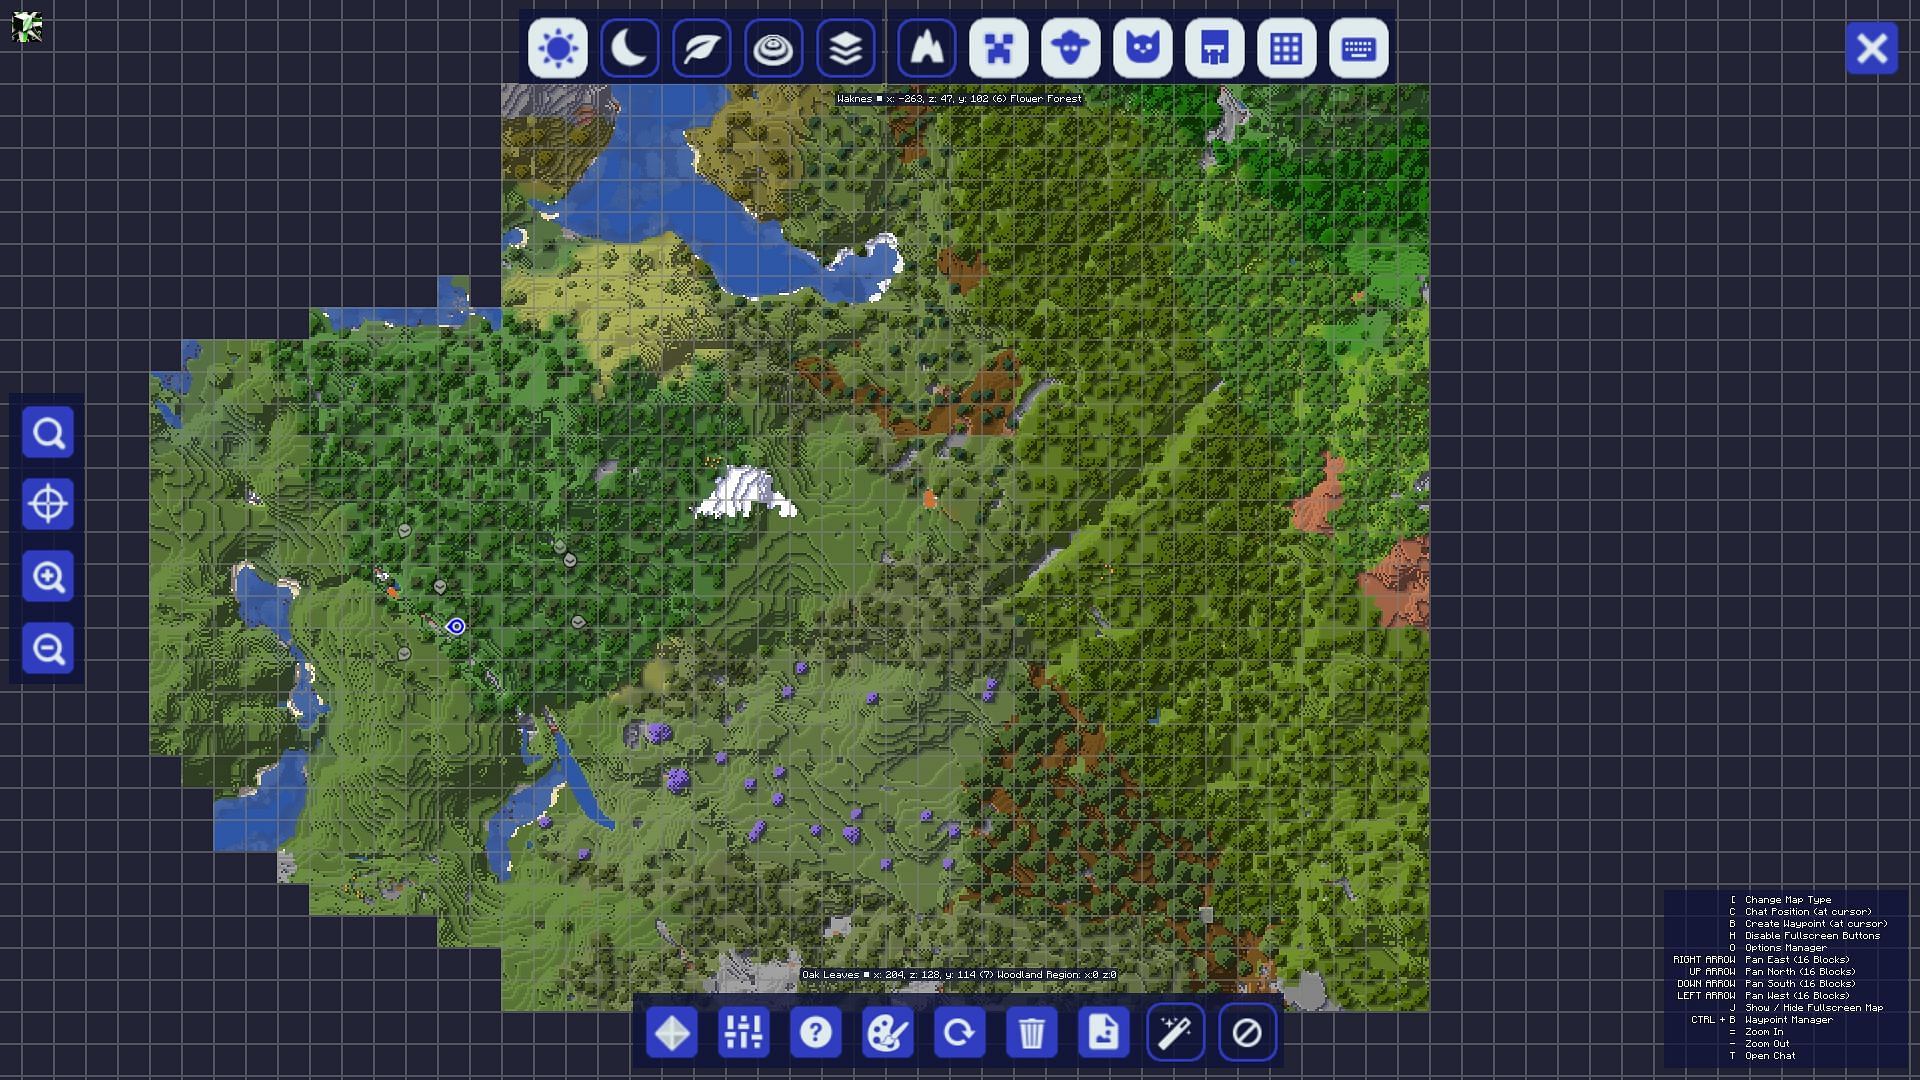 A player looking at the full size JourneyMap map (Image via Minecraft)